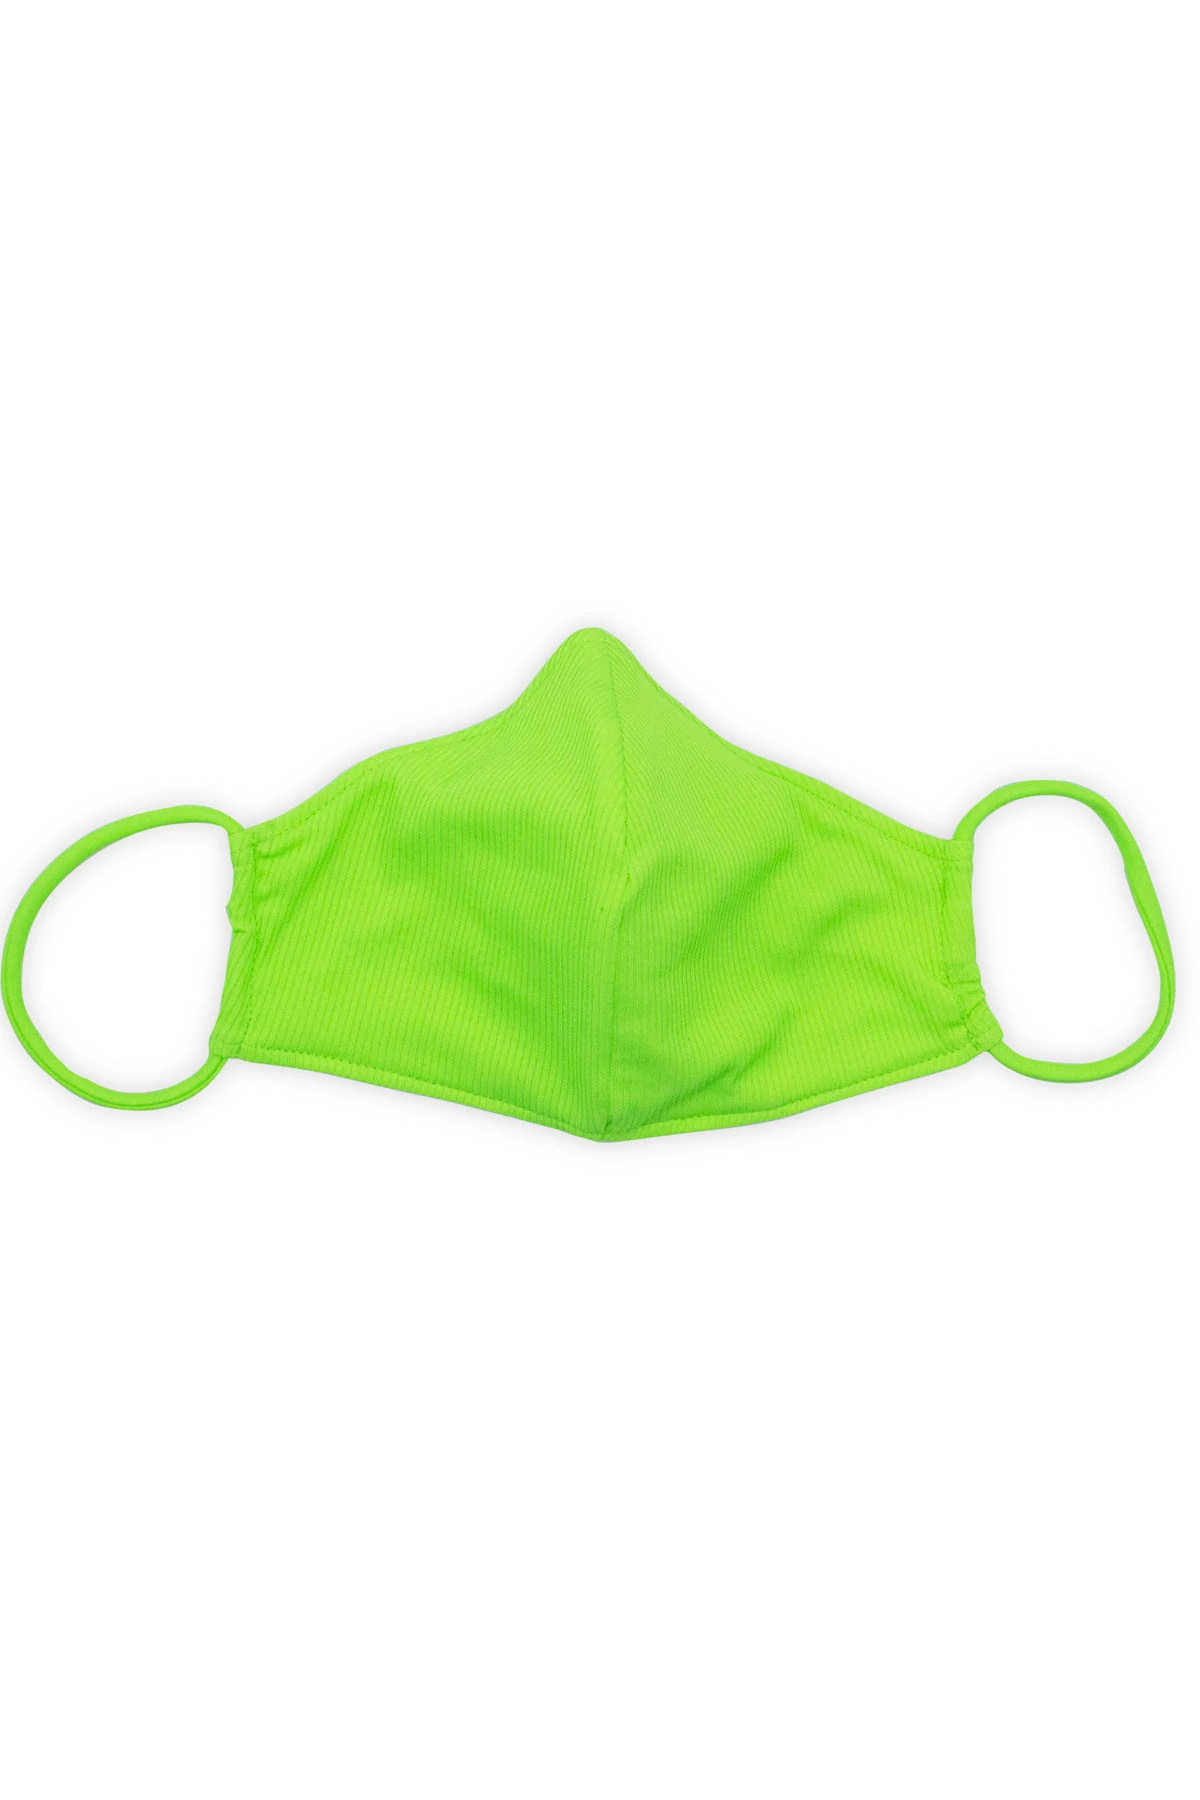 LIME Lime Ribbed Adult Face Mask image number 1